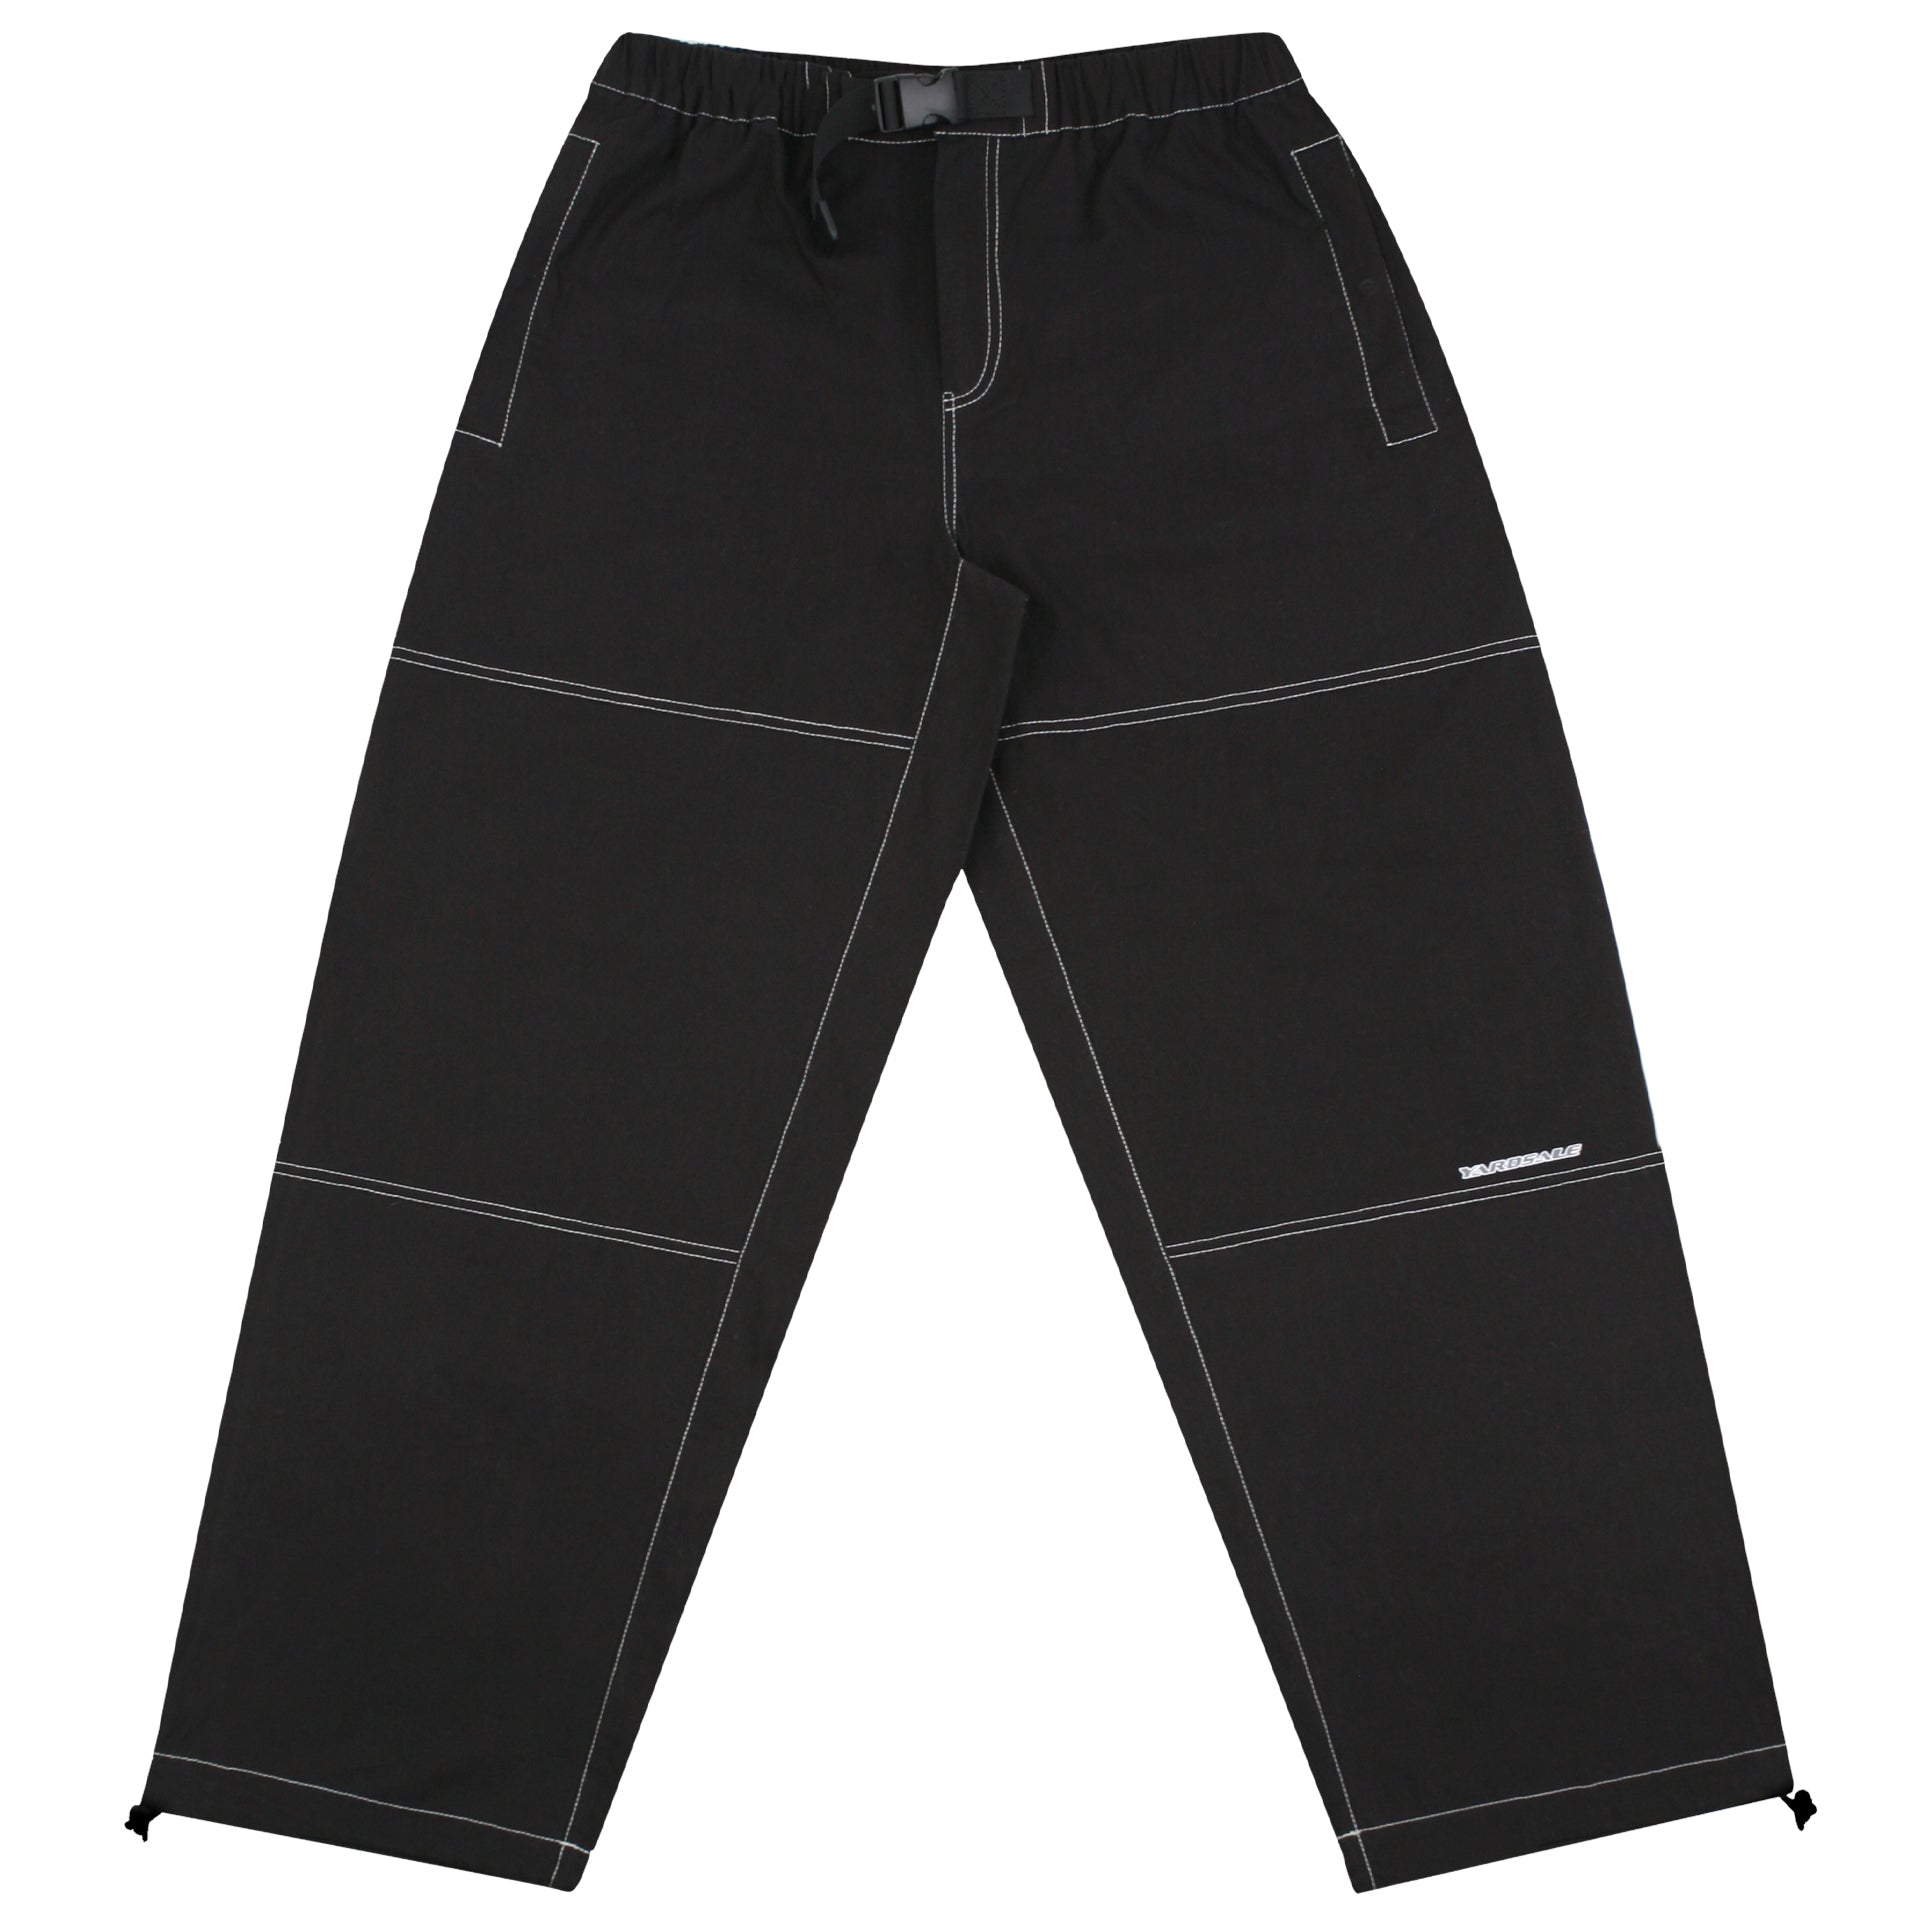 Gingtto Contrast Bootcut Weatpants - XS